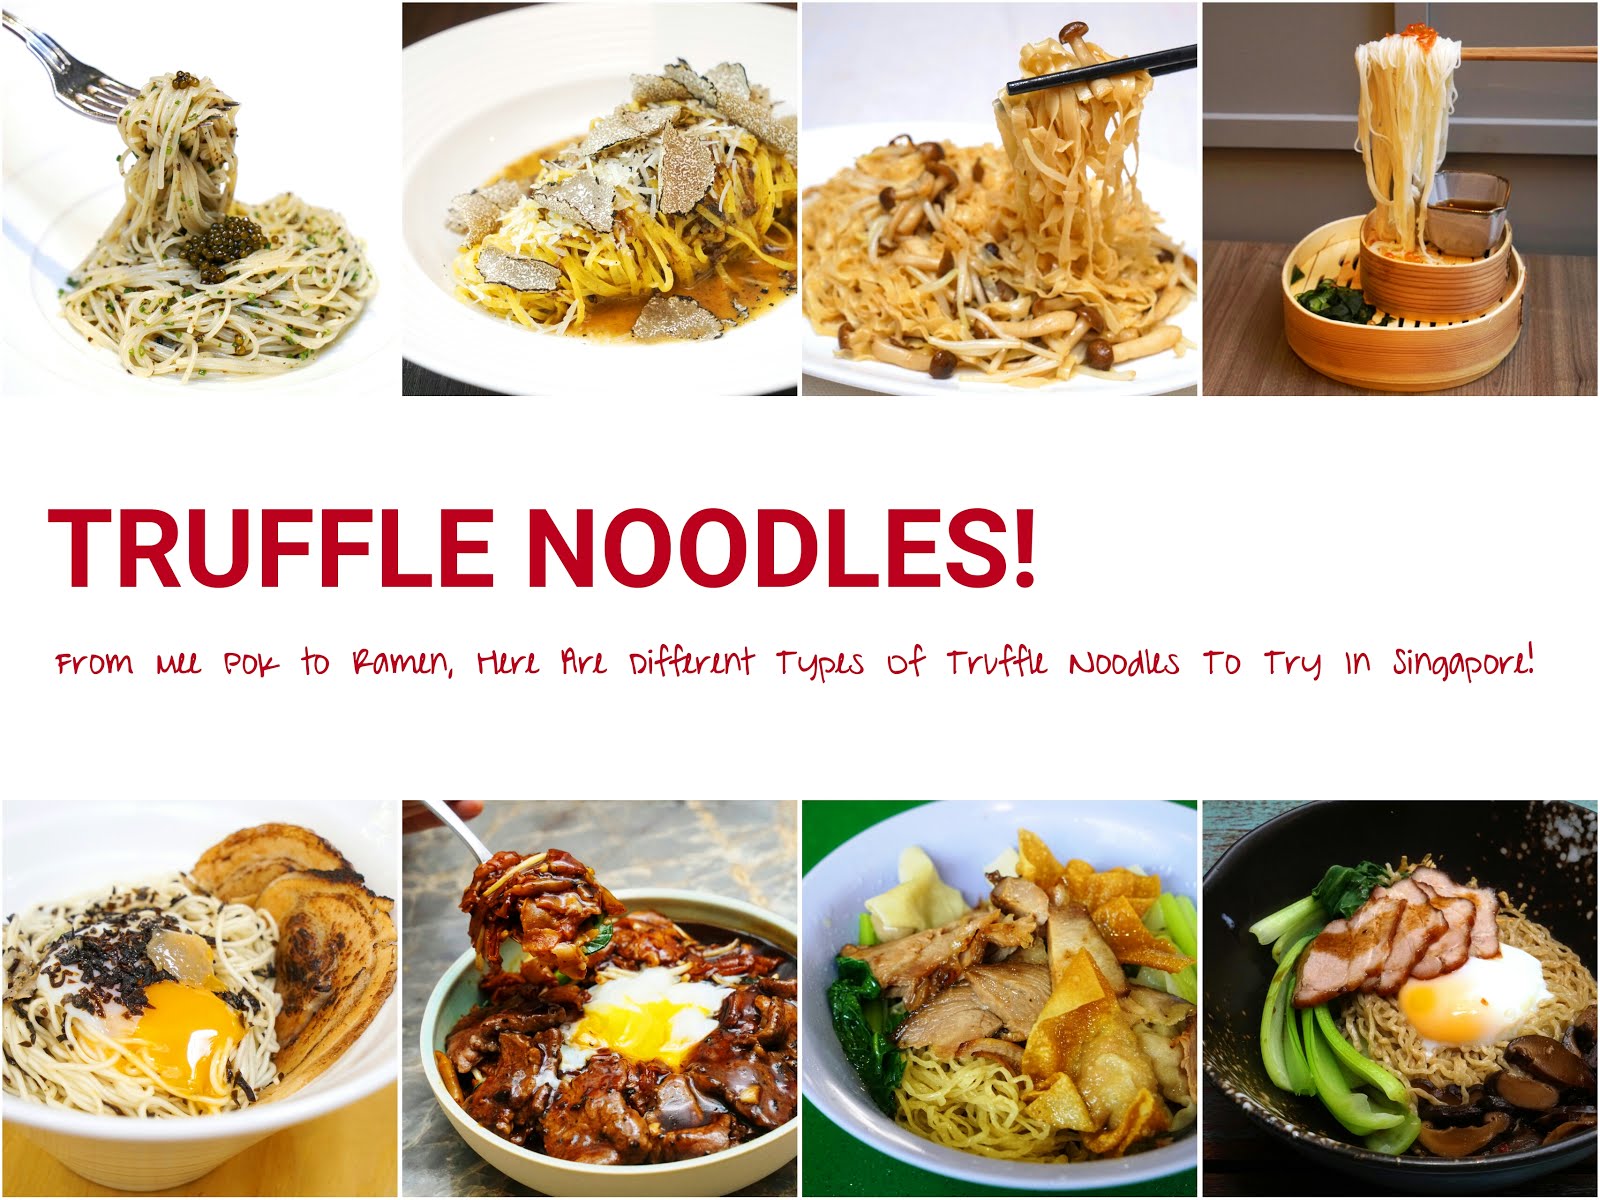 TRUFFLE NOODLES! The Very Best & Different Types Available In Singapore